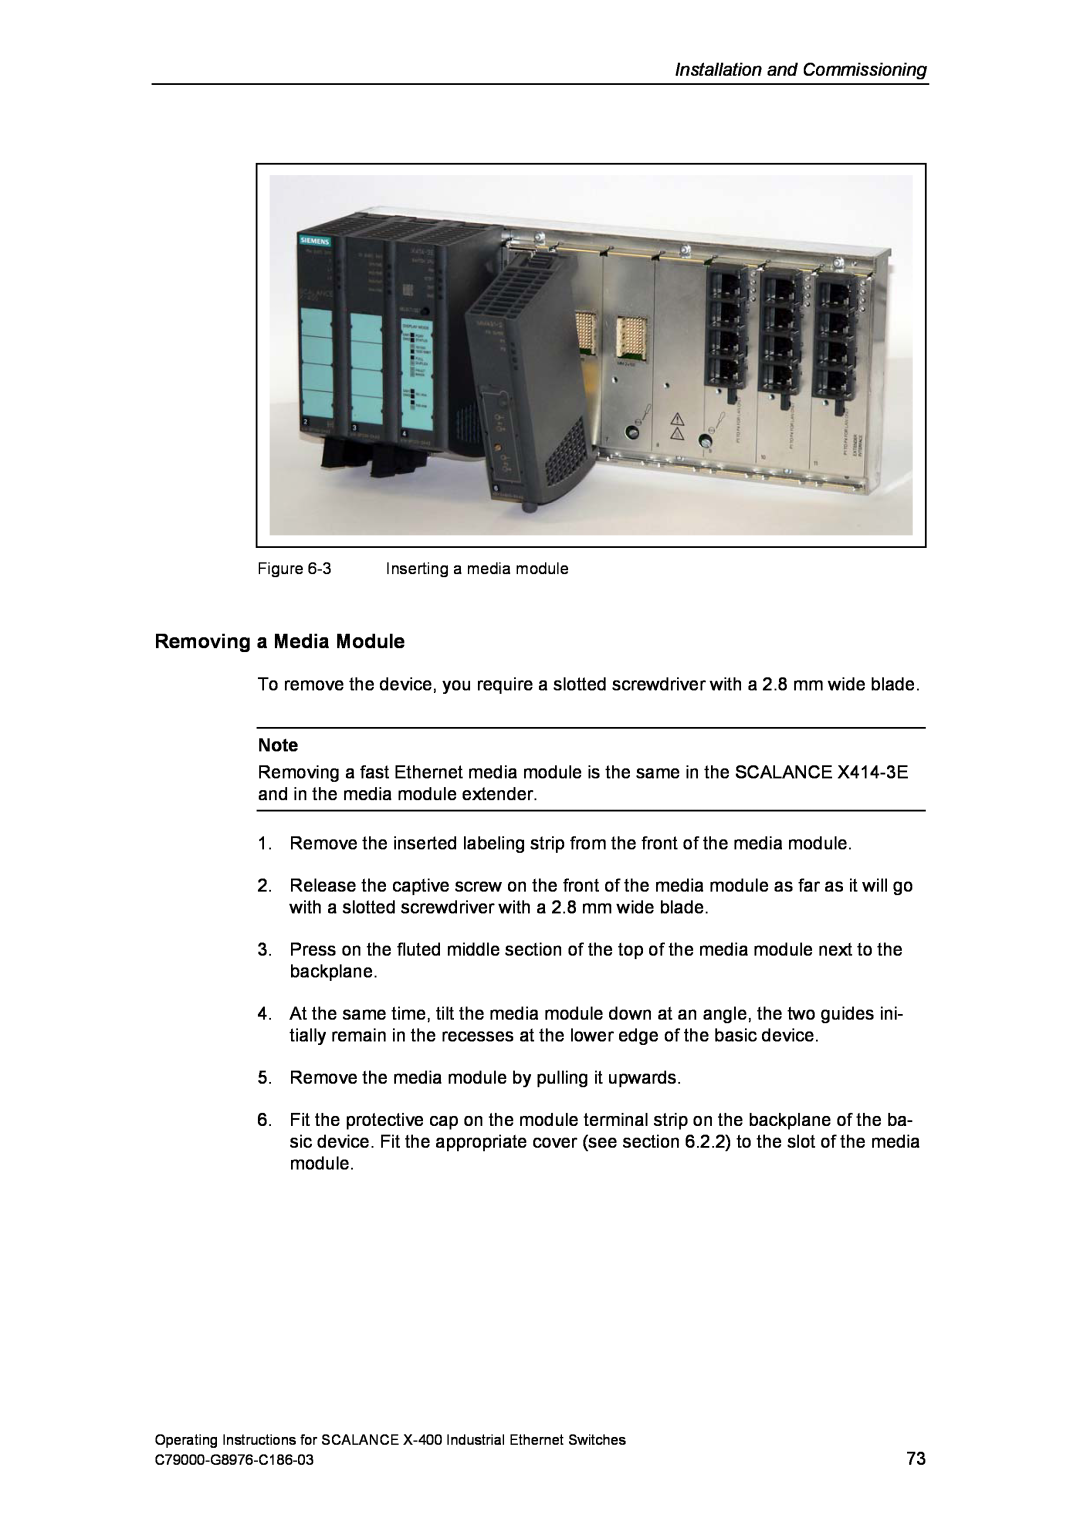 Siemens X-400 technical specifications Removing a Media Module, Installation and Commissioning 